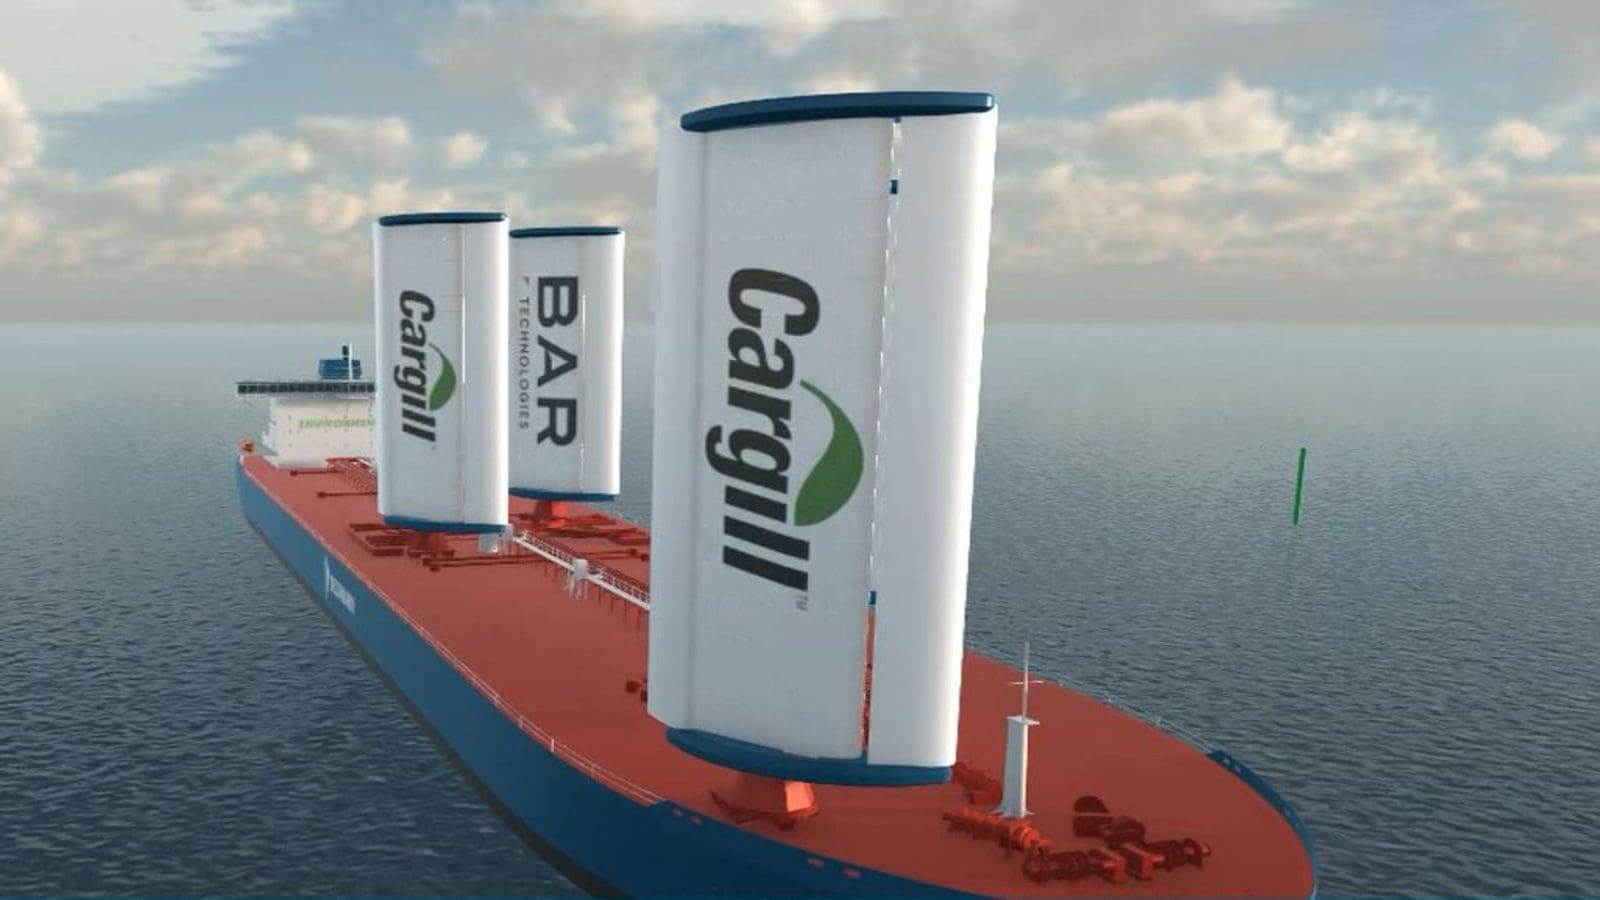 Cargill considers wind power to decarbonize its shipping